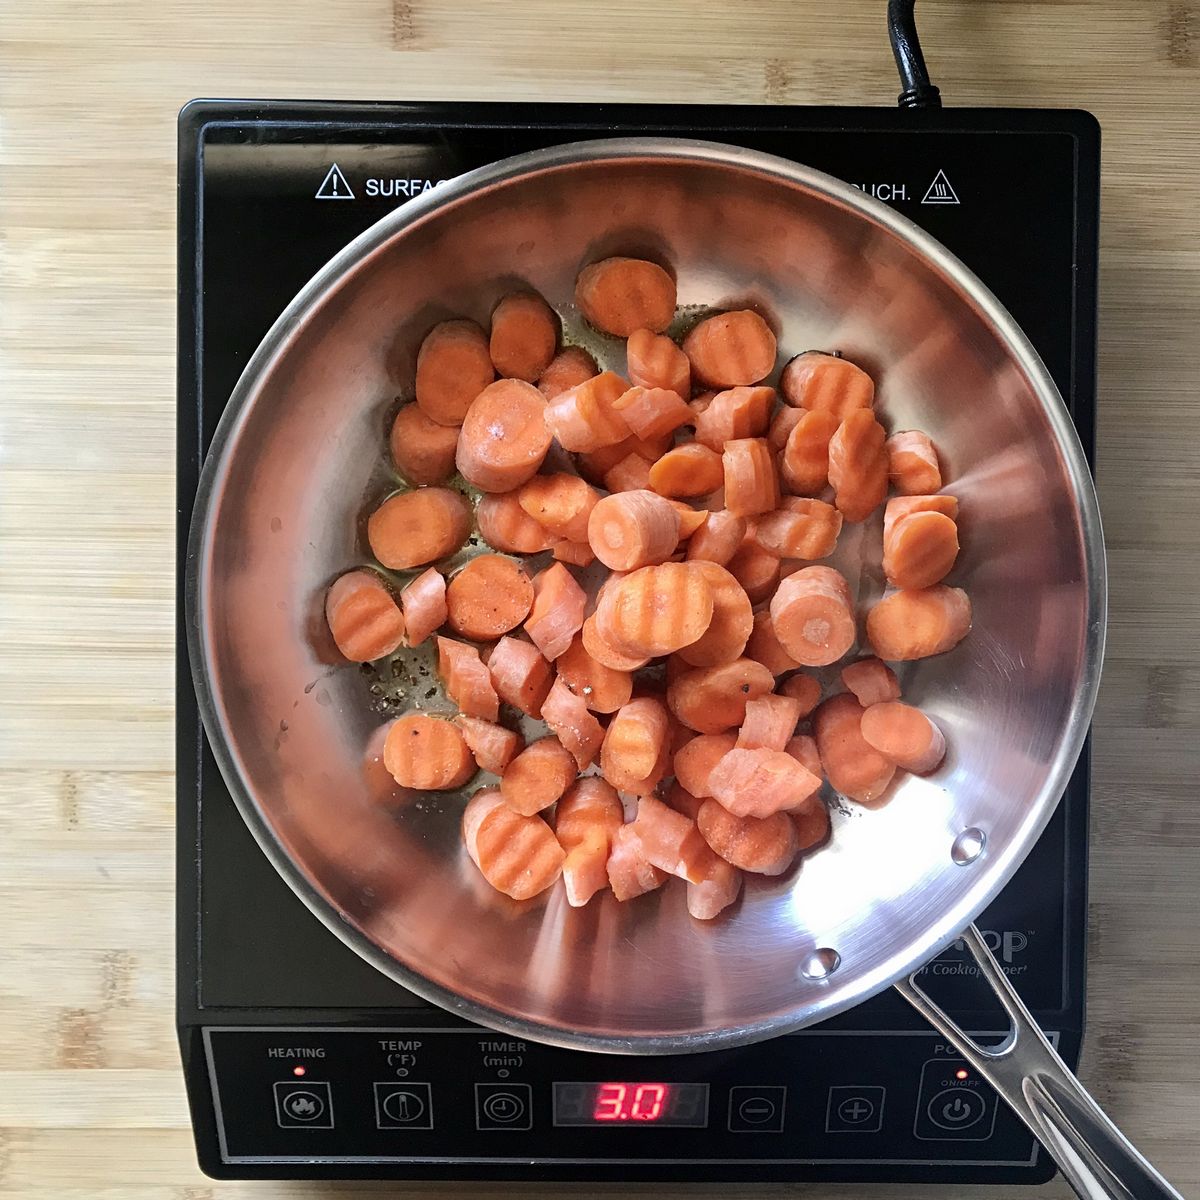 Carrots are sauteed in a large pan.